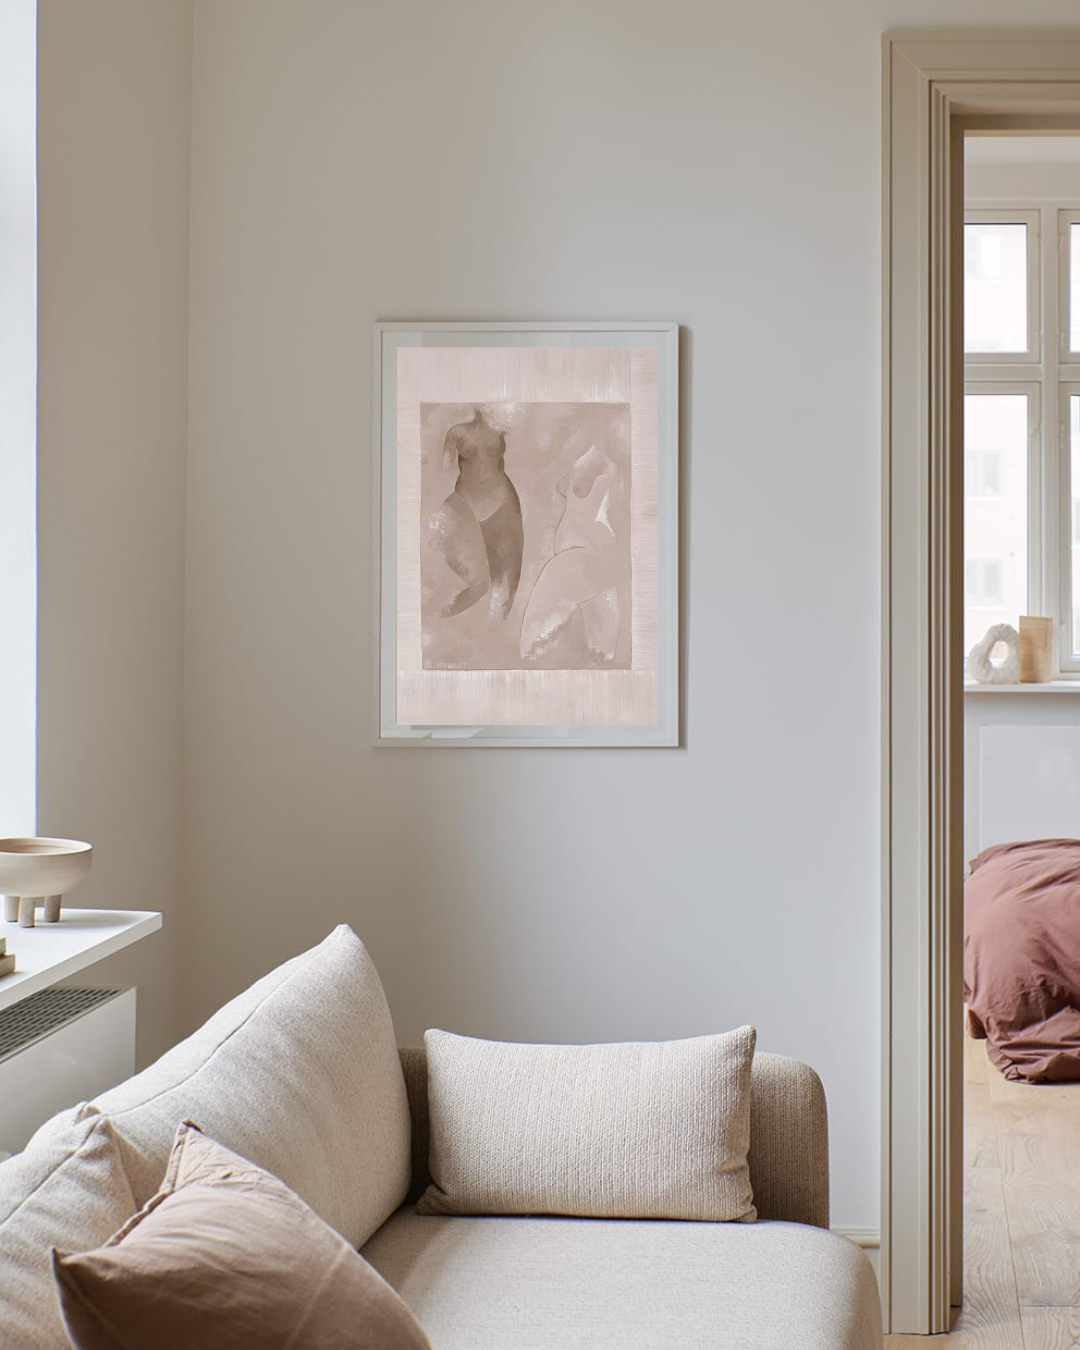 Naked female figure watercolour artwork in a neutral colour palette pictured on the wall